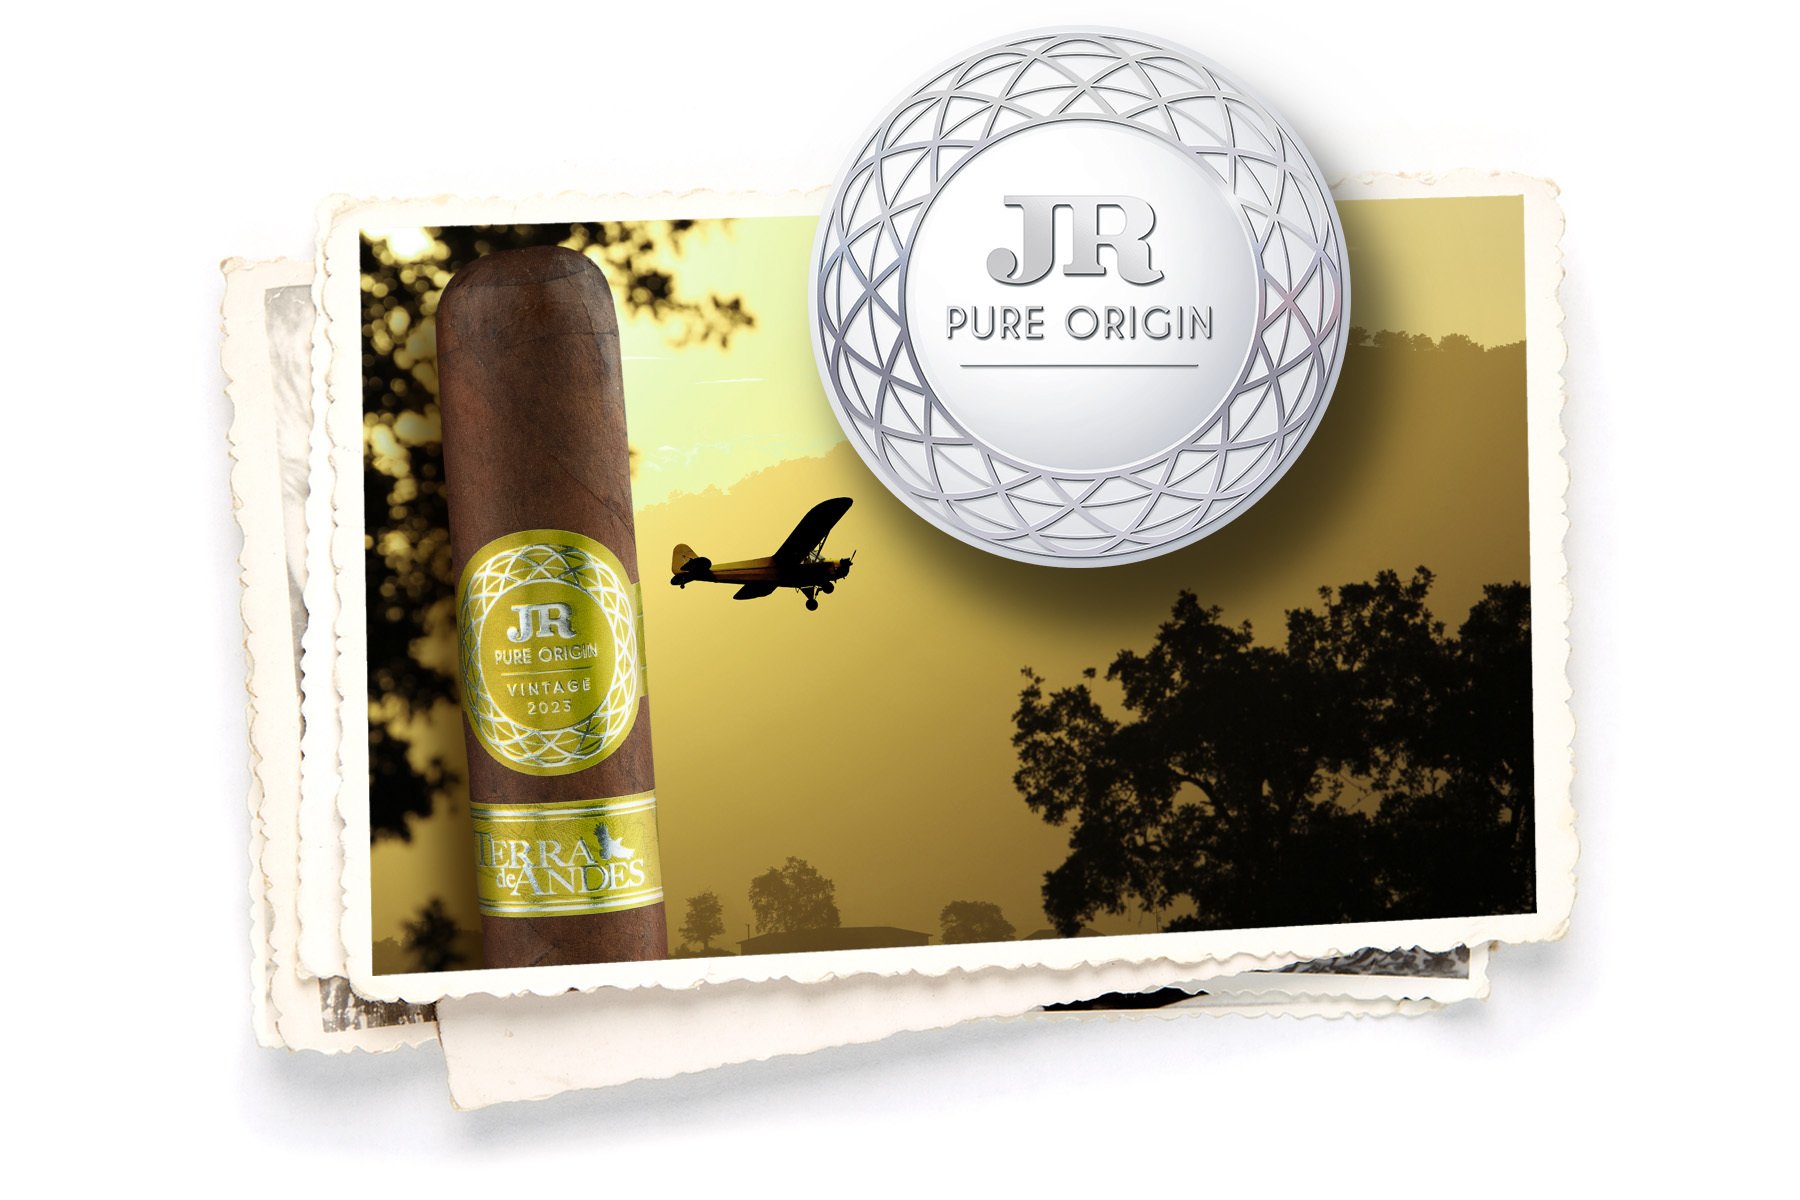 terra de andes single cigar with airplane flying above and pure origin seal logo